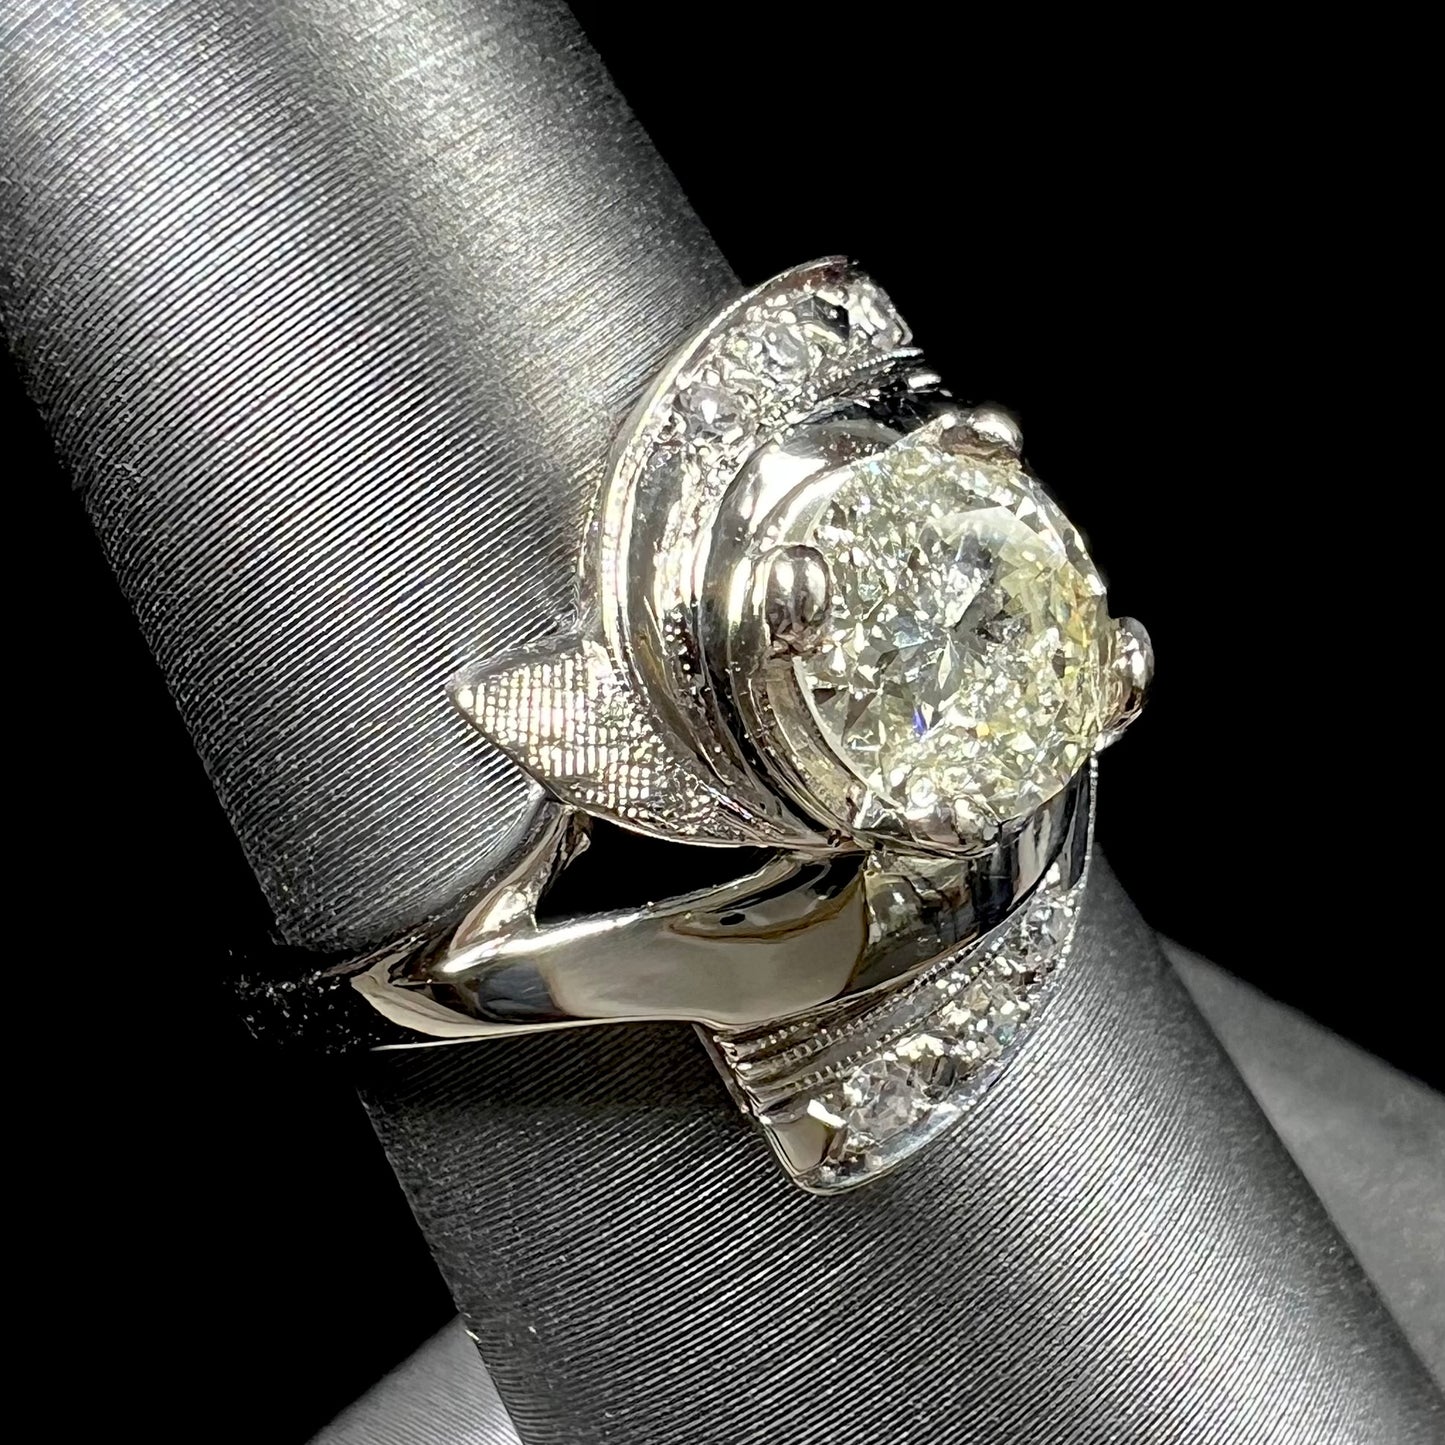 A vintage, Art Nouveau style diamond engagment ring.  The ring is white gold with a yellowish, M colored, 1.24 carat diamond.